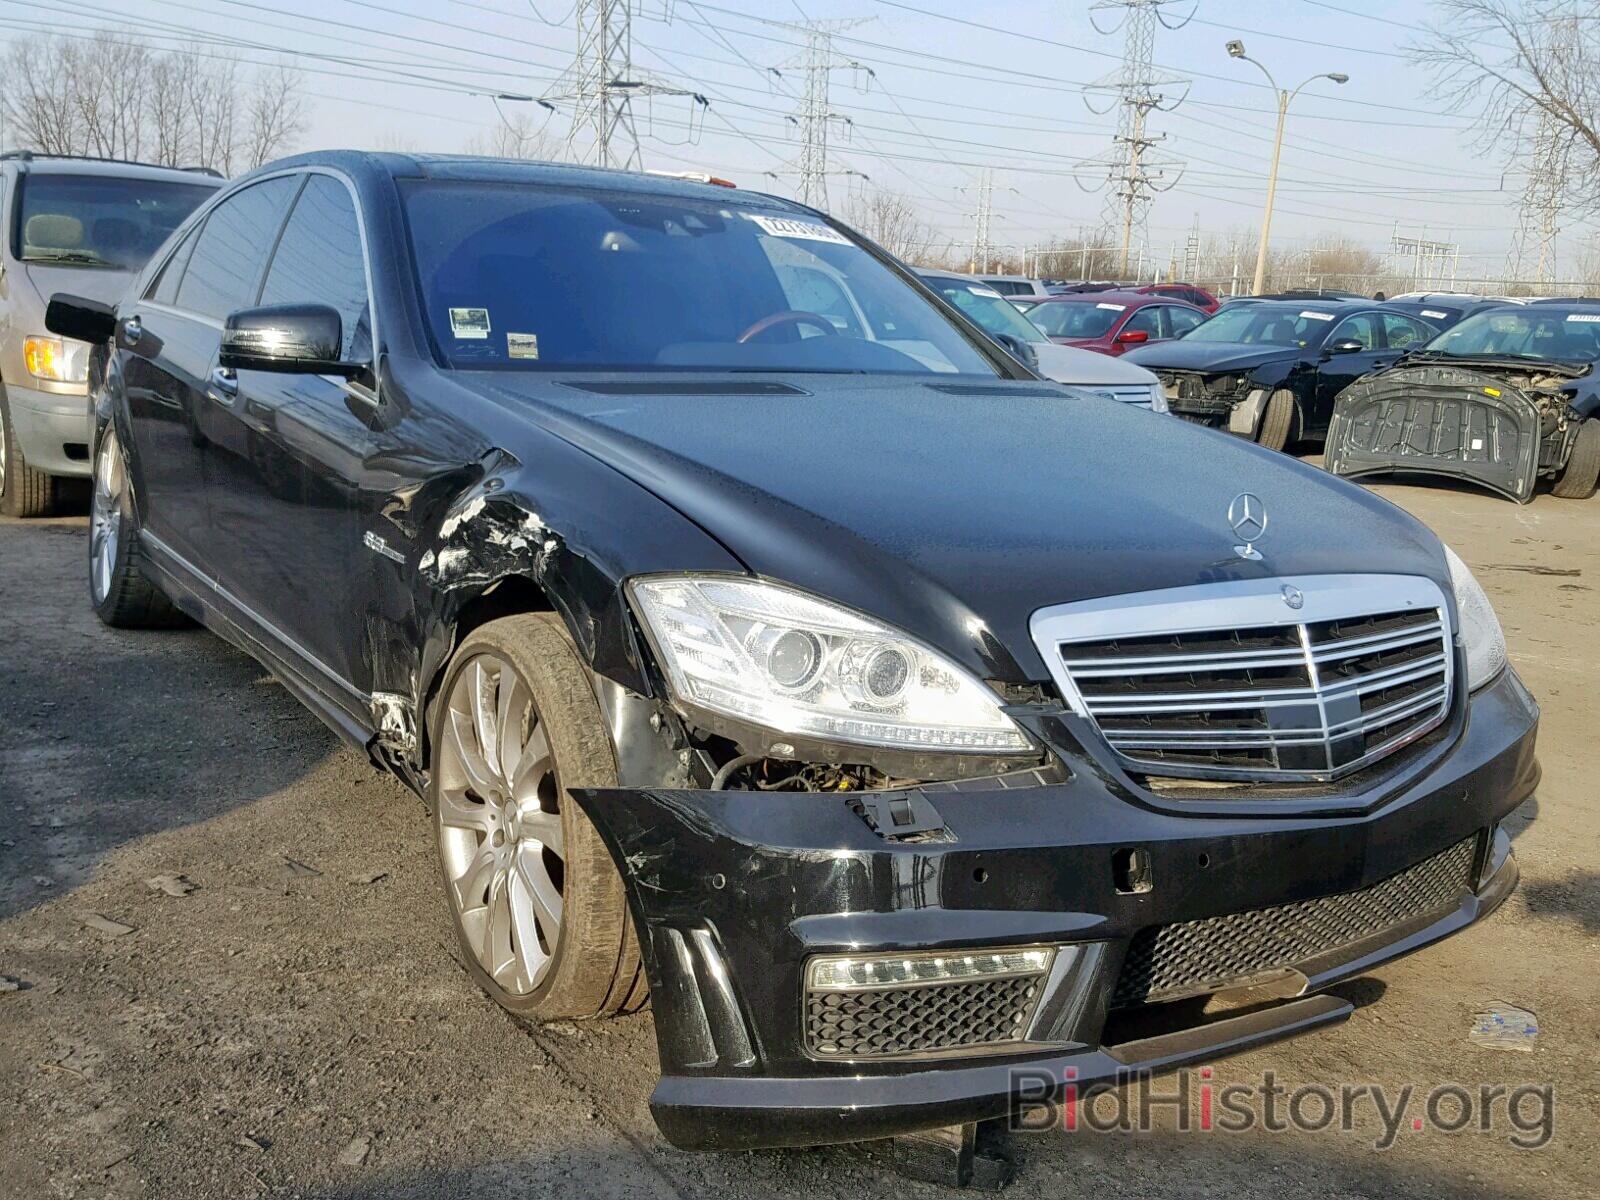 Photo WDDNG7HB2AA357987 - MERCEDES-BENZ AMG 2010